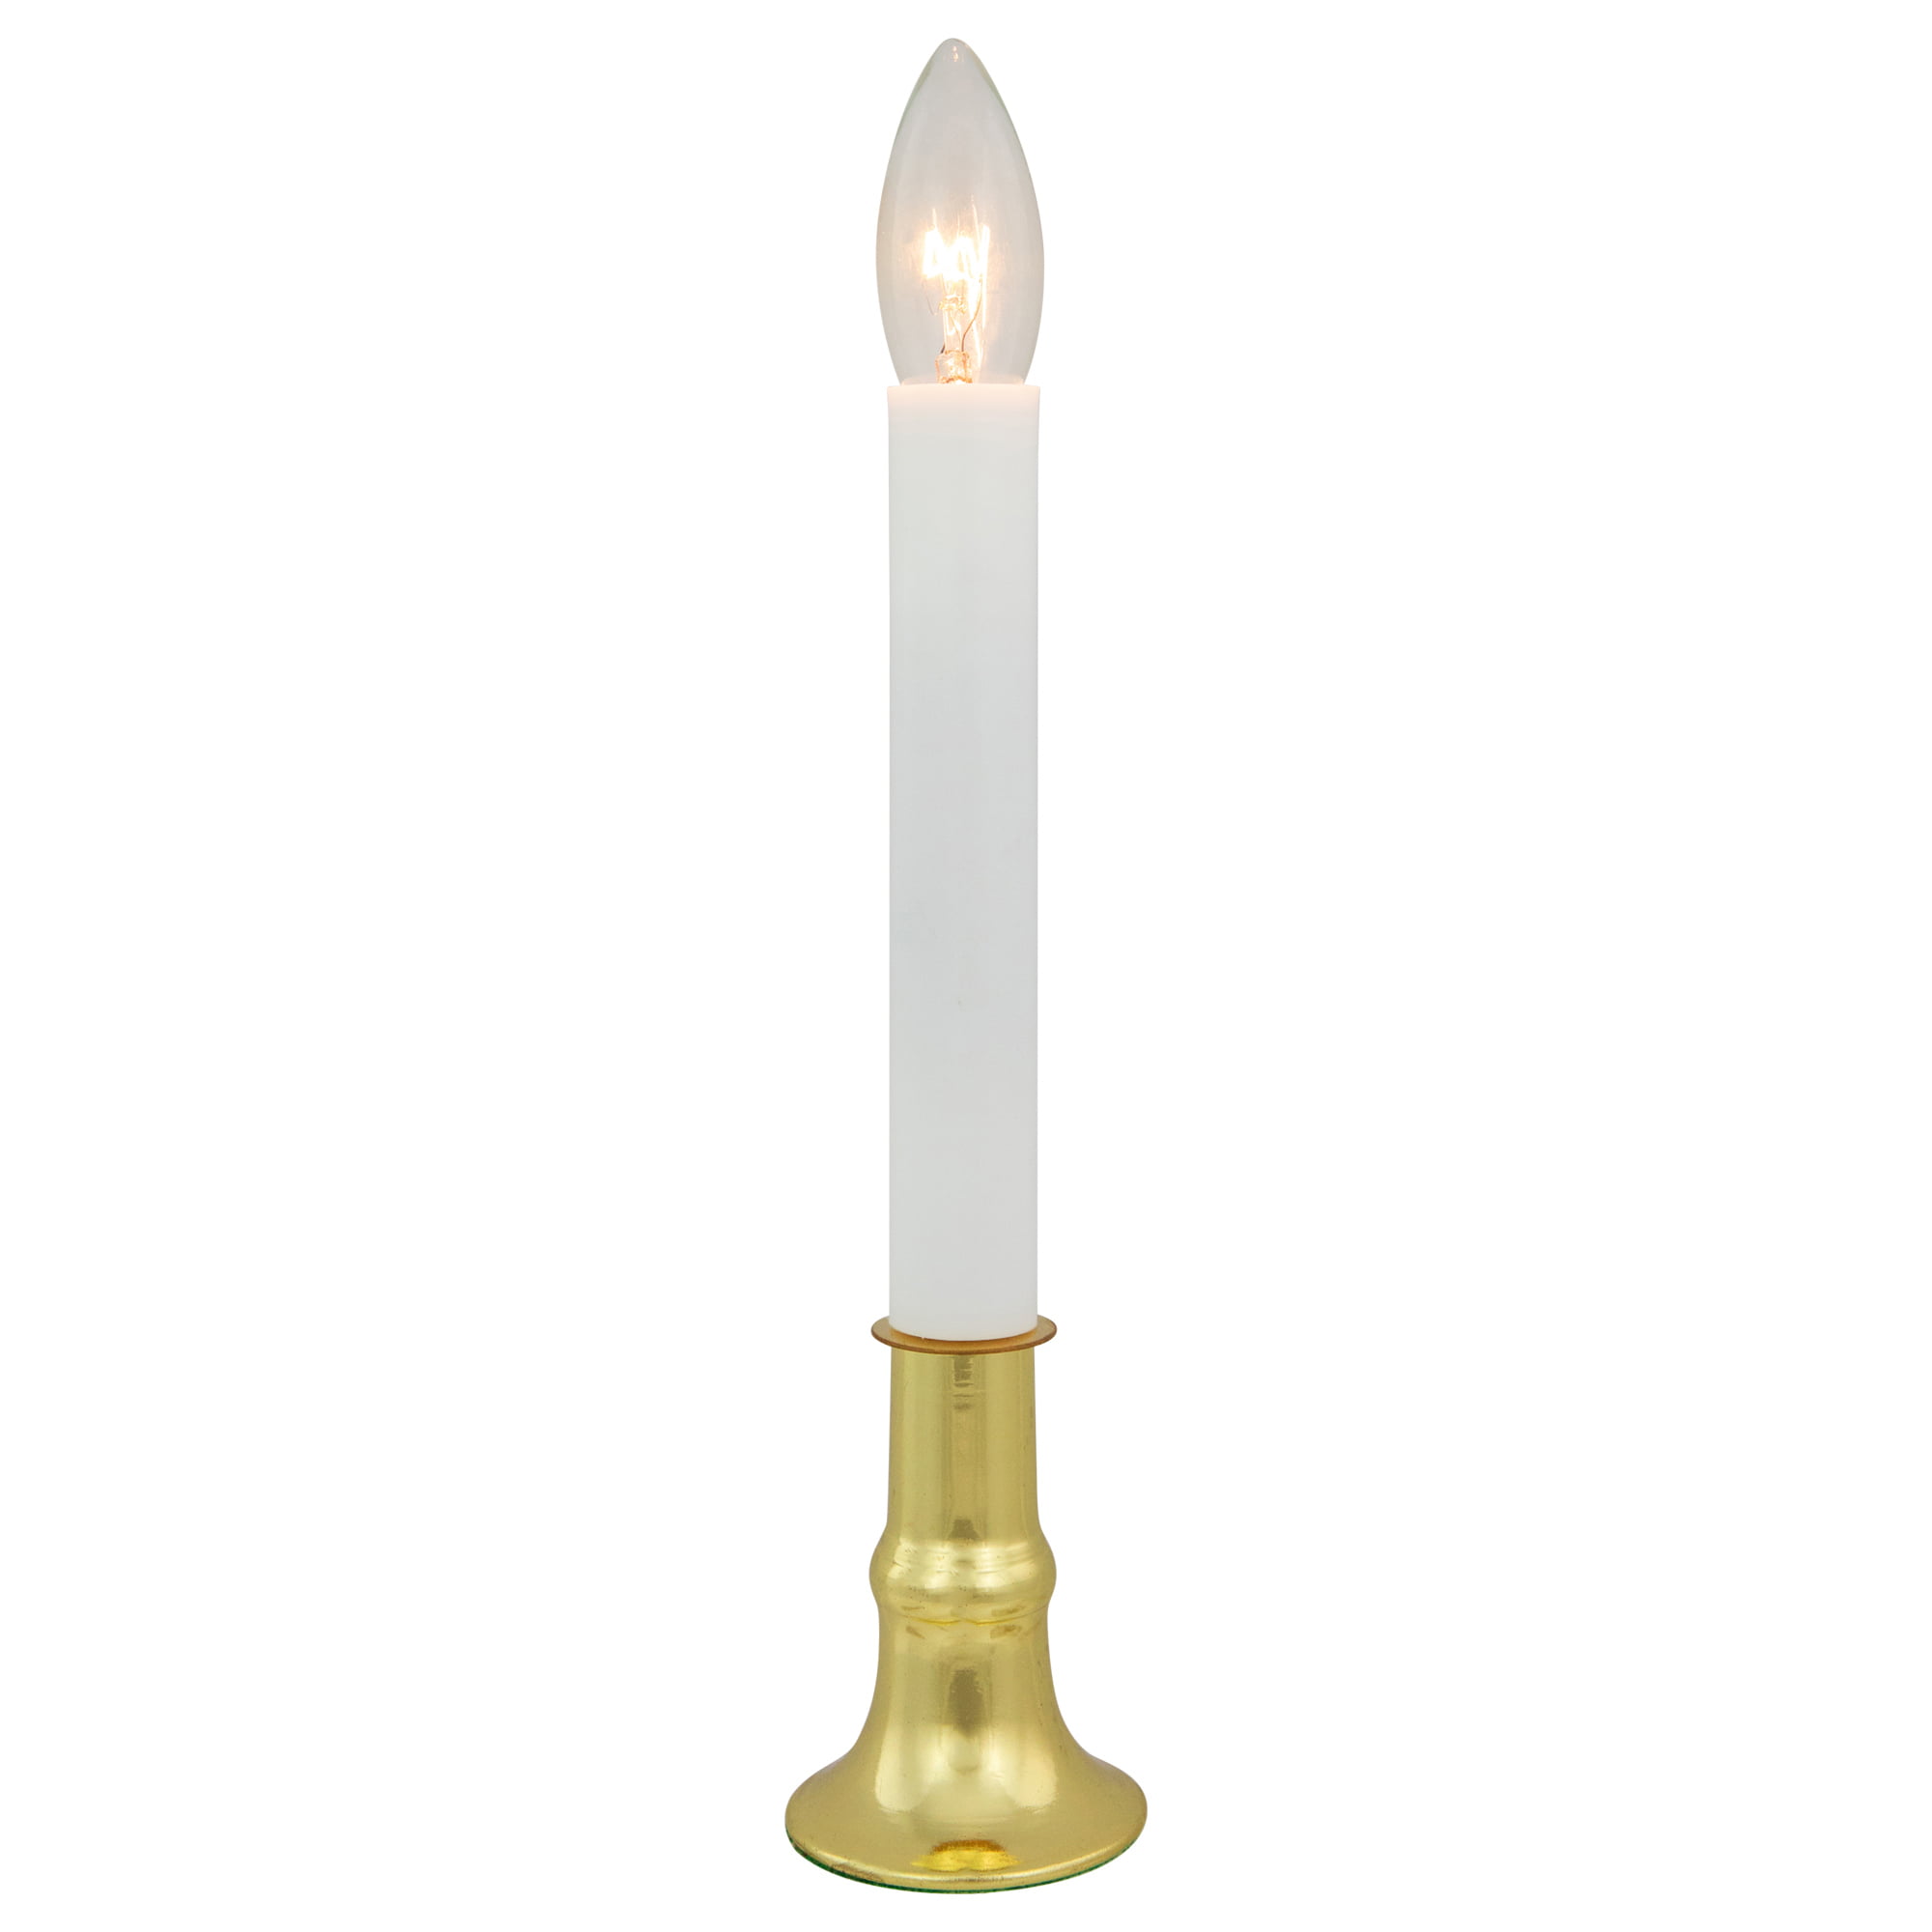 Details about   24 Sylvania V1533-88 9" Gold Battery Operated Christmas Candle Candoliers 